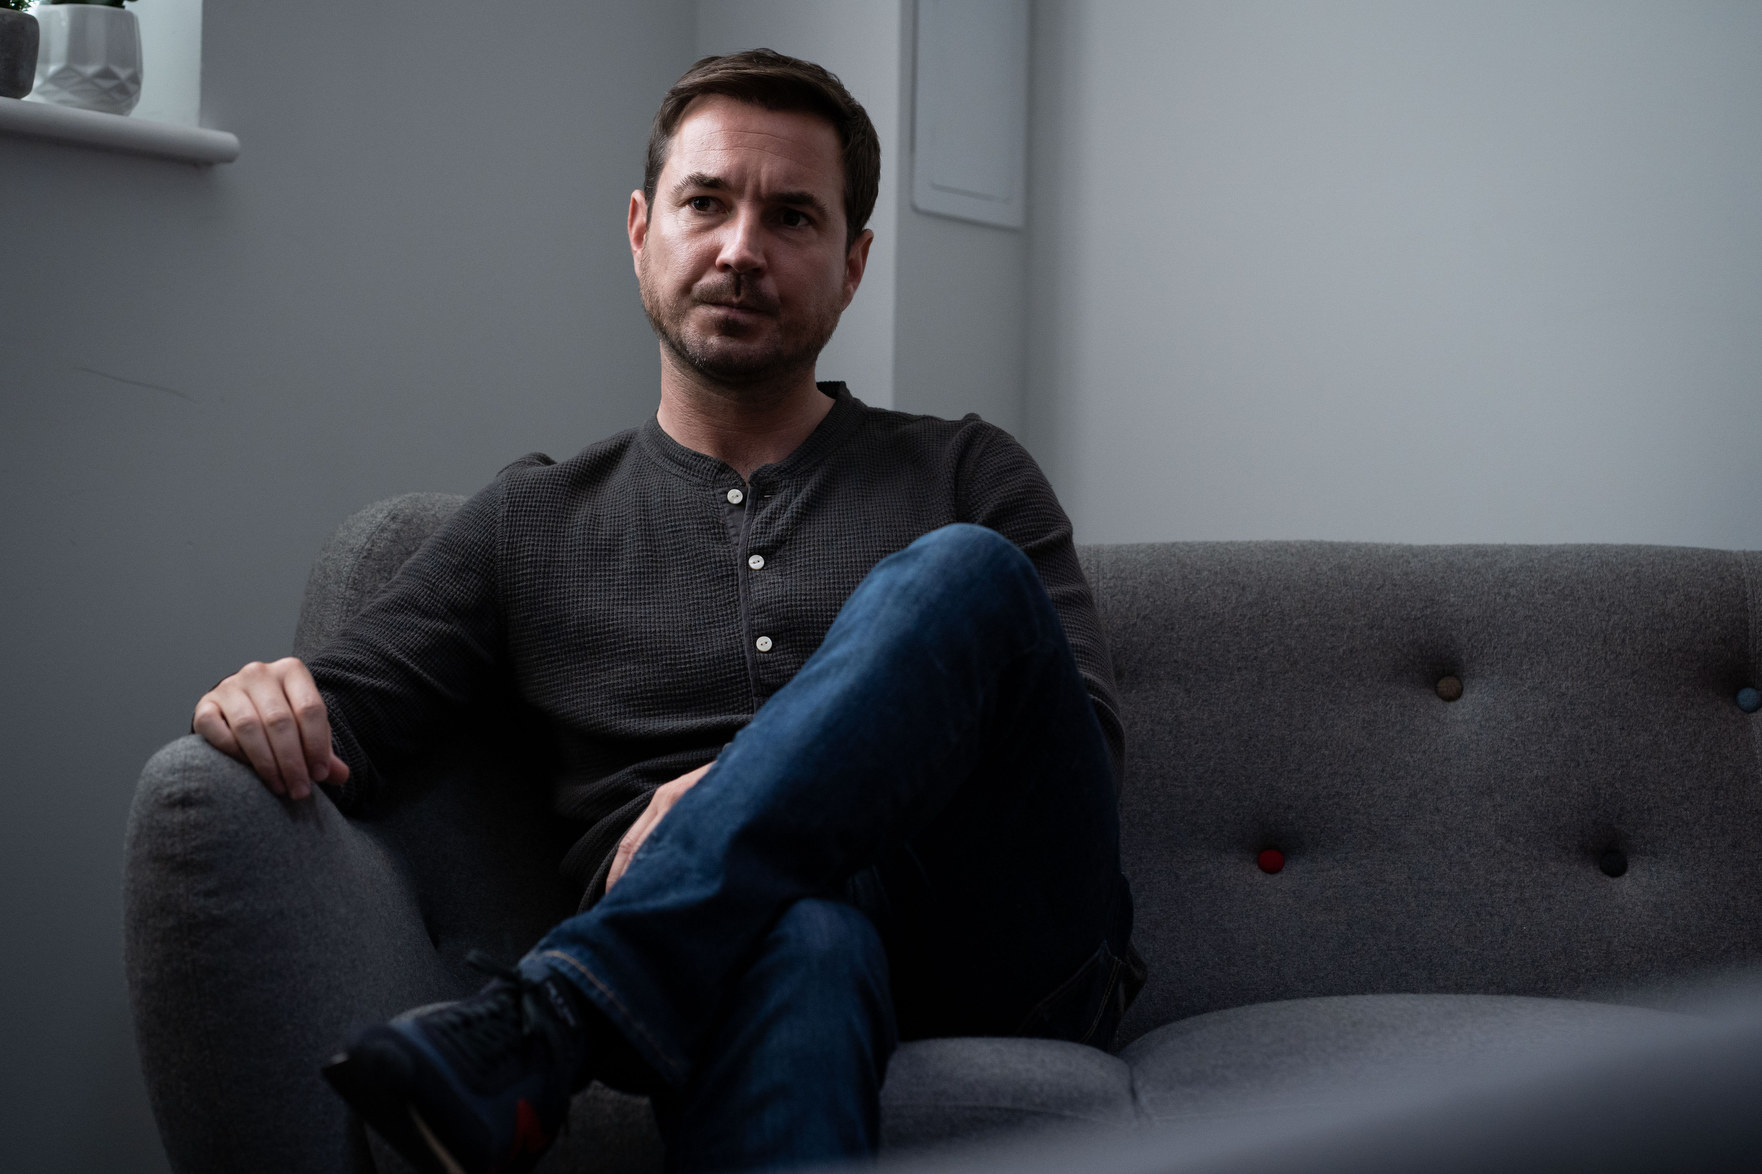 A worried looking Martin Compston as Bram Lawson sitting on a sofa